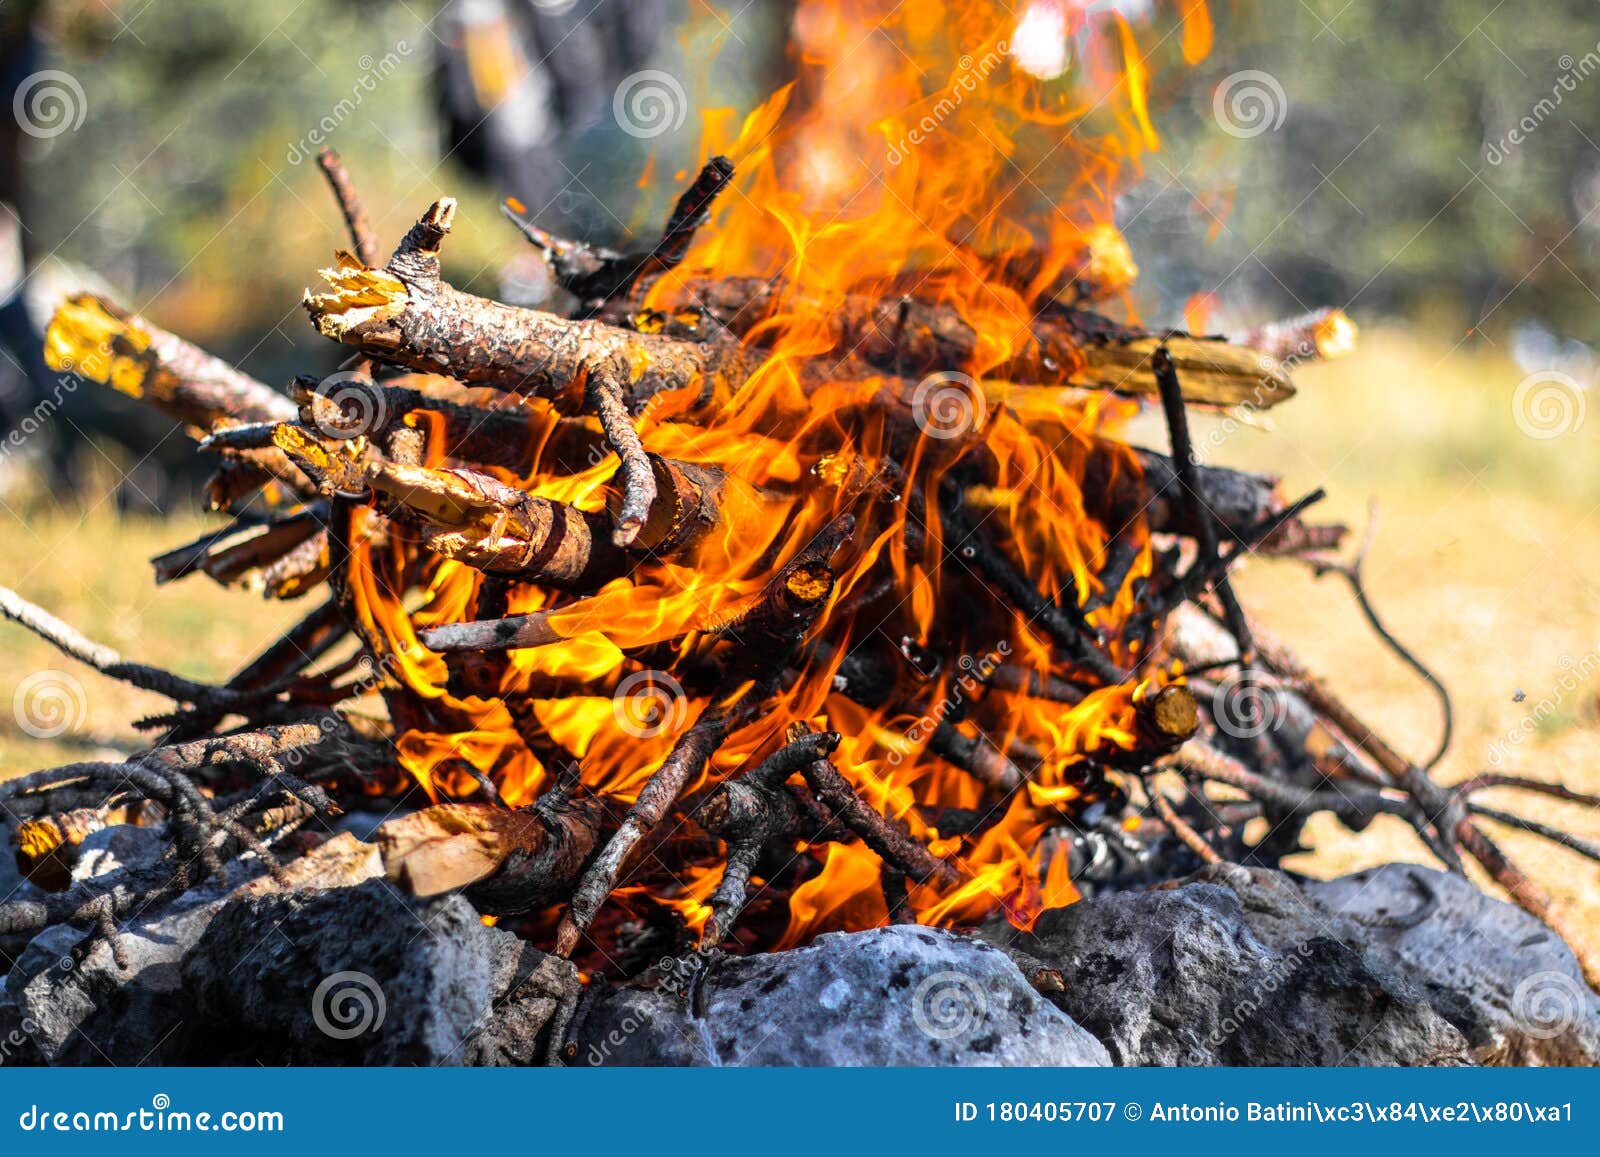 Closeup of a Wooden Campfire. Stock Image - Image of background, flames ...